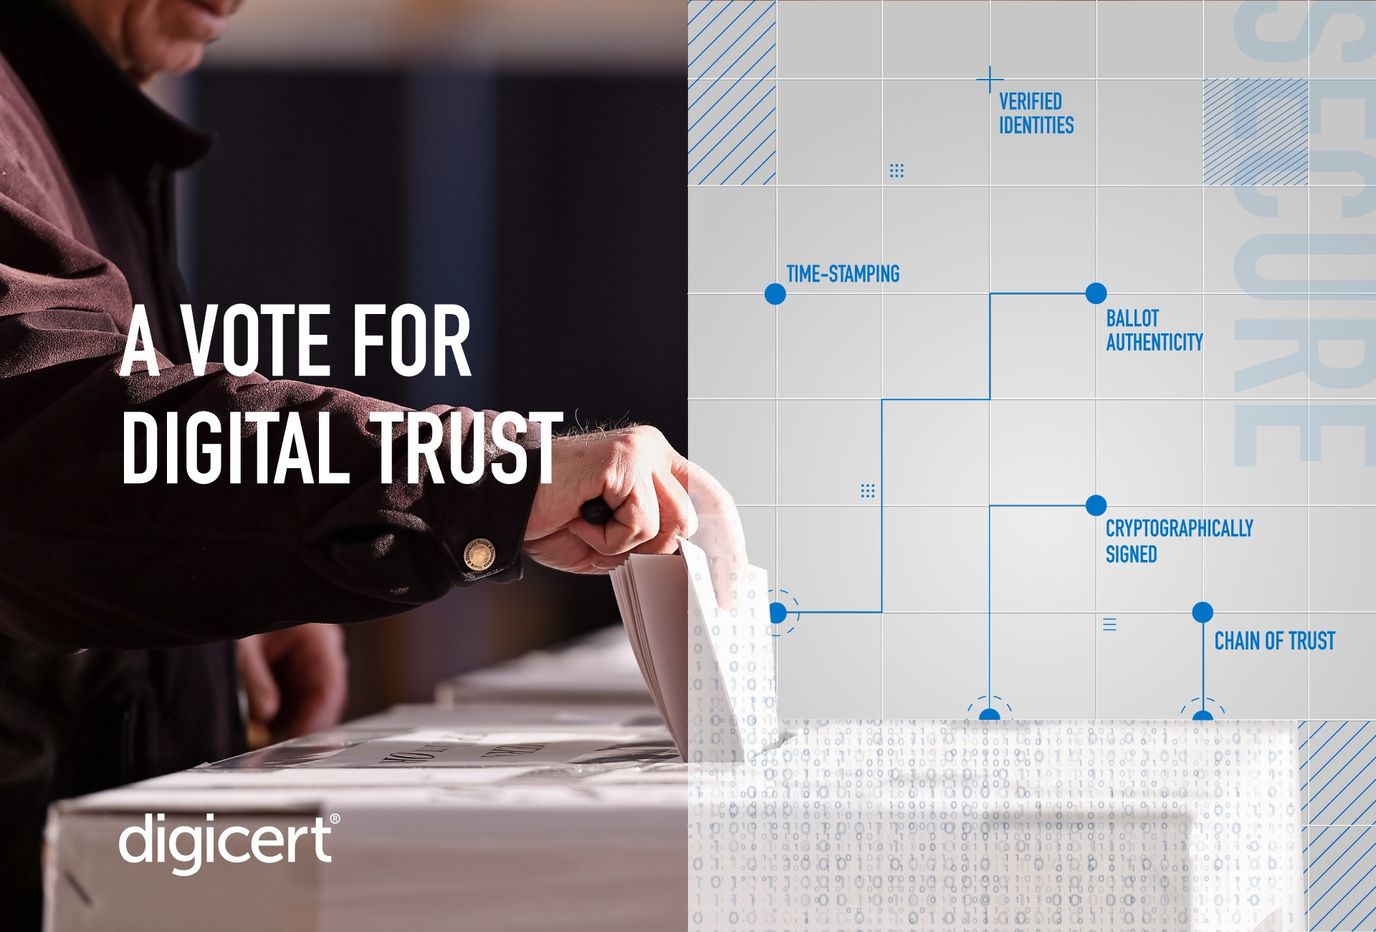 A Vote for Digital Trust - Digital trust and election integrity